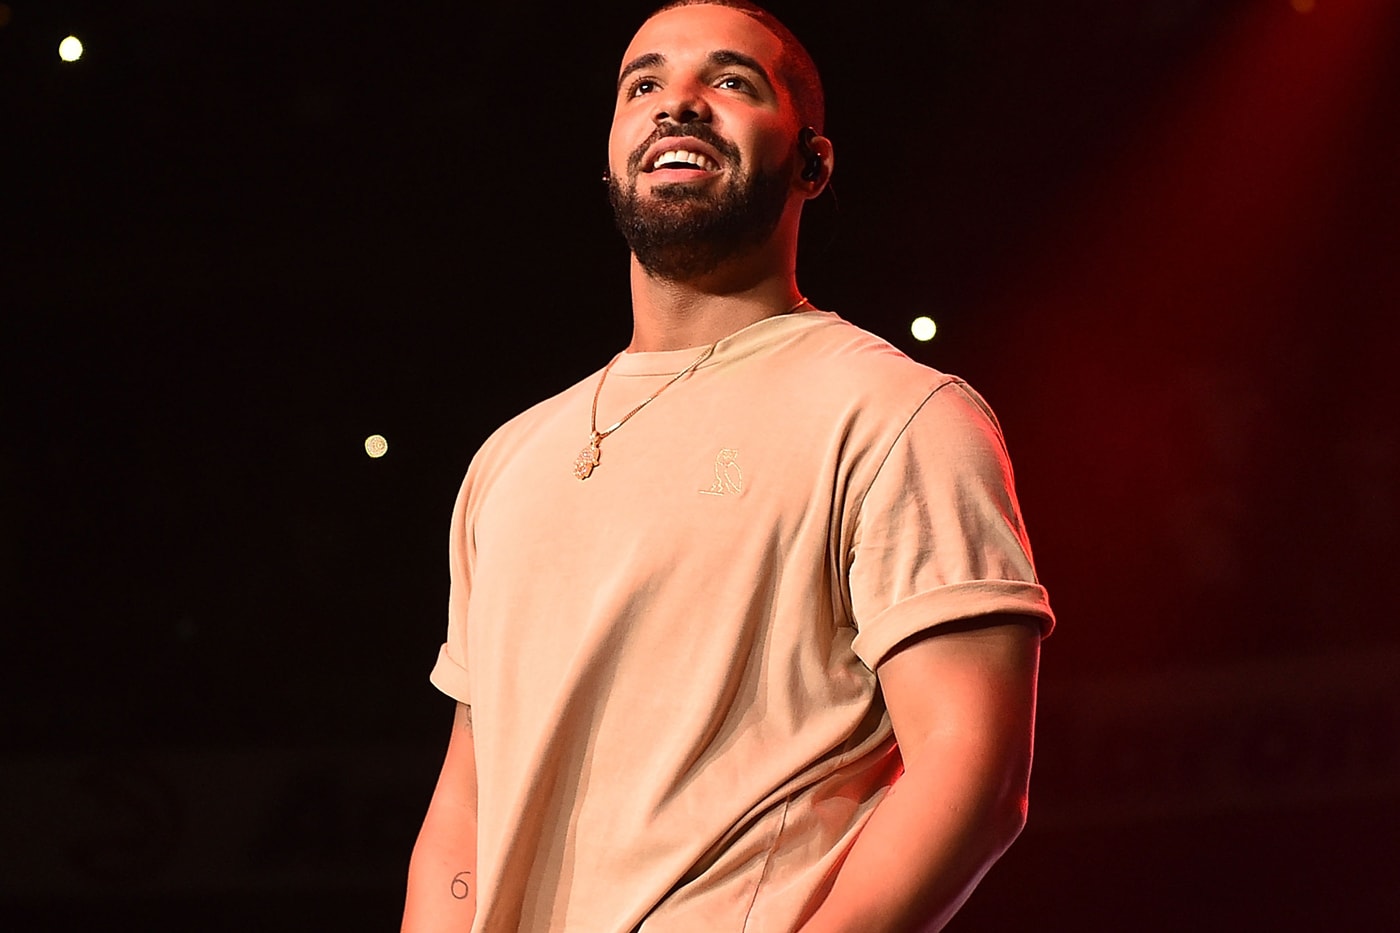 Drake Talks Meek Mill Beef and 'More Life' With DJ Semtex